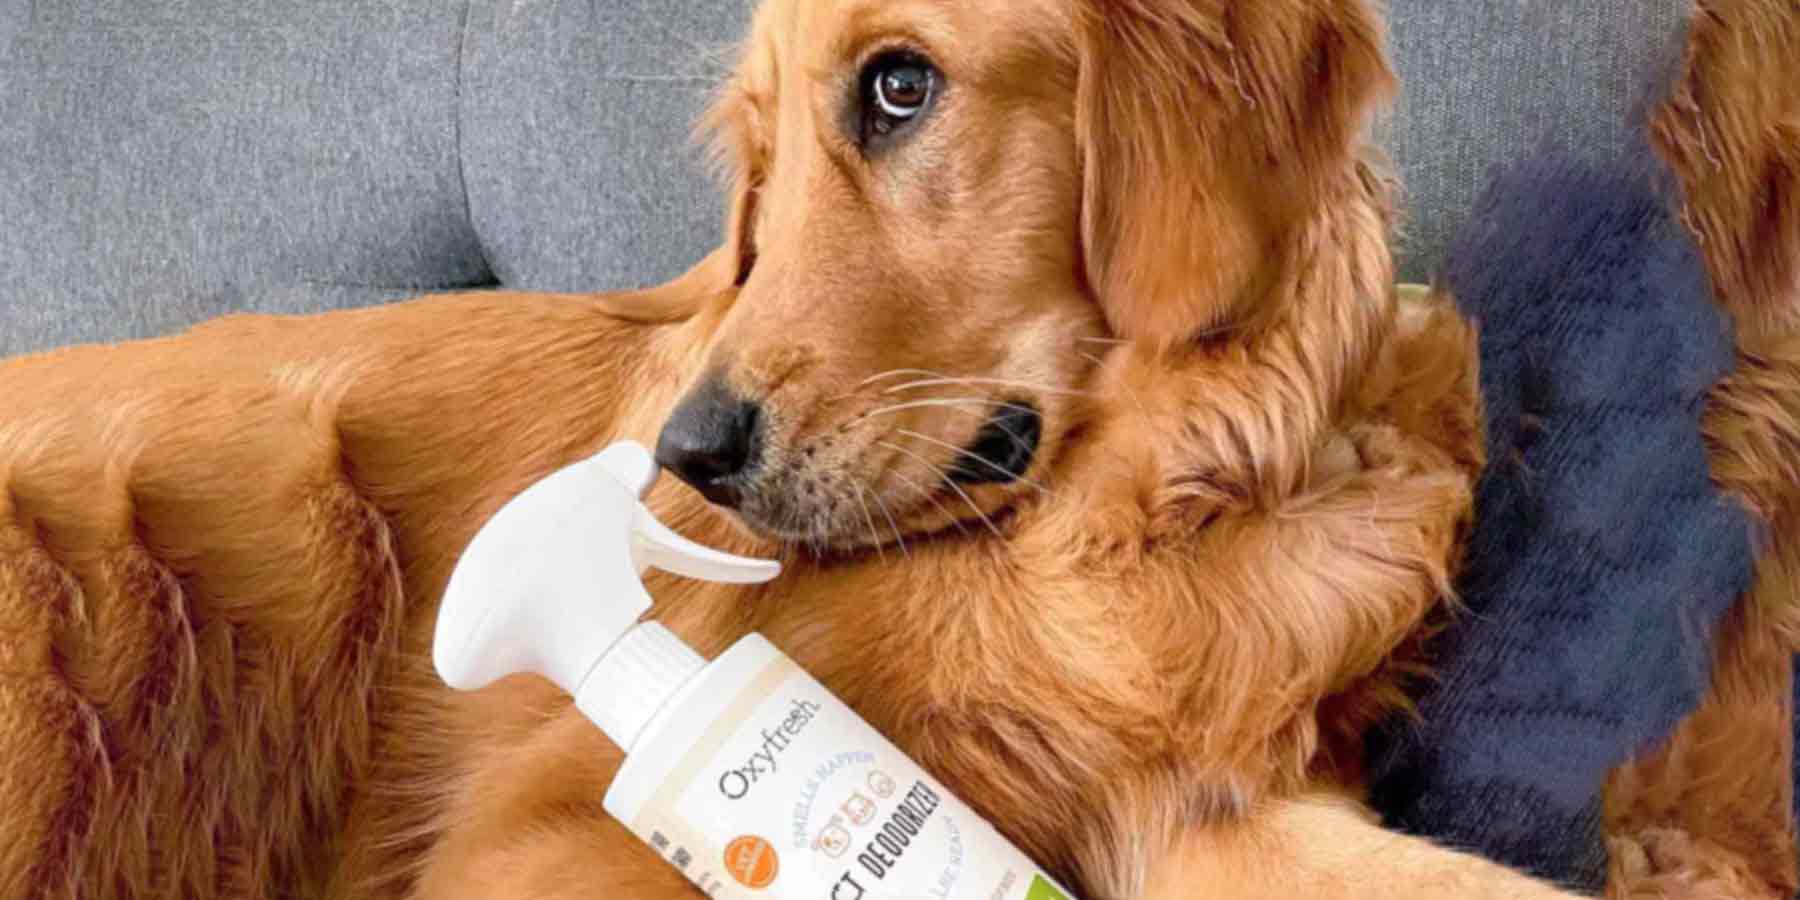 Social-Media-Post-From-Instagram-User-_allyburson-golden-retriever-laying-on-couch-with-oxyfresh-pet-deodorizer-spray-a-pet-odor-eliminator